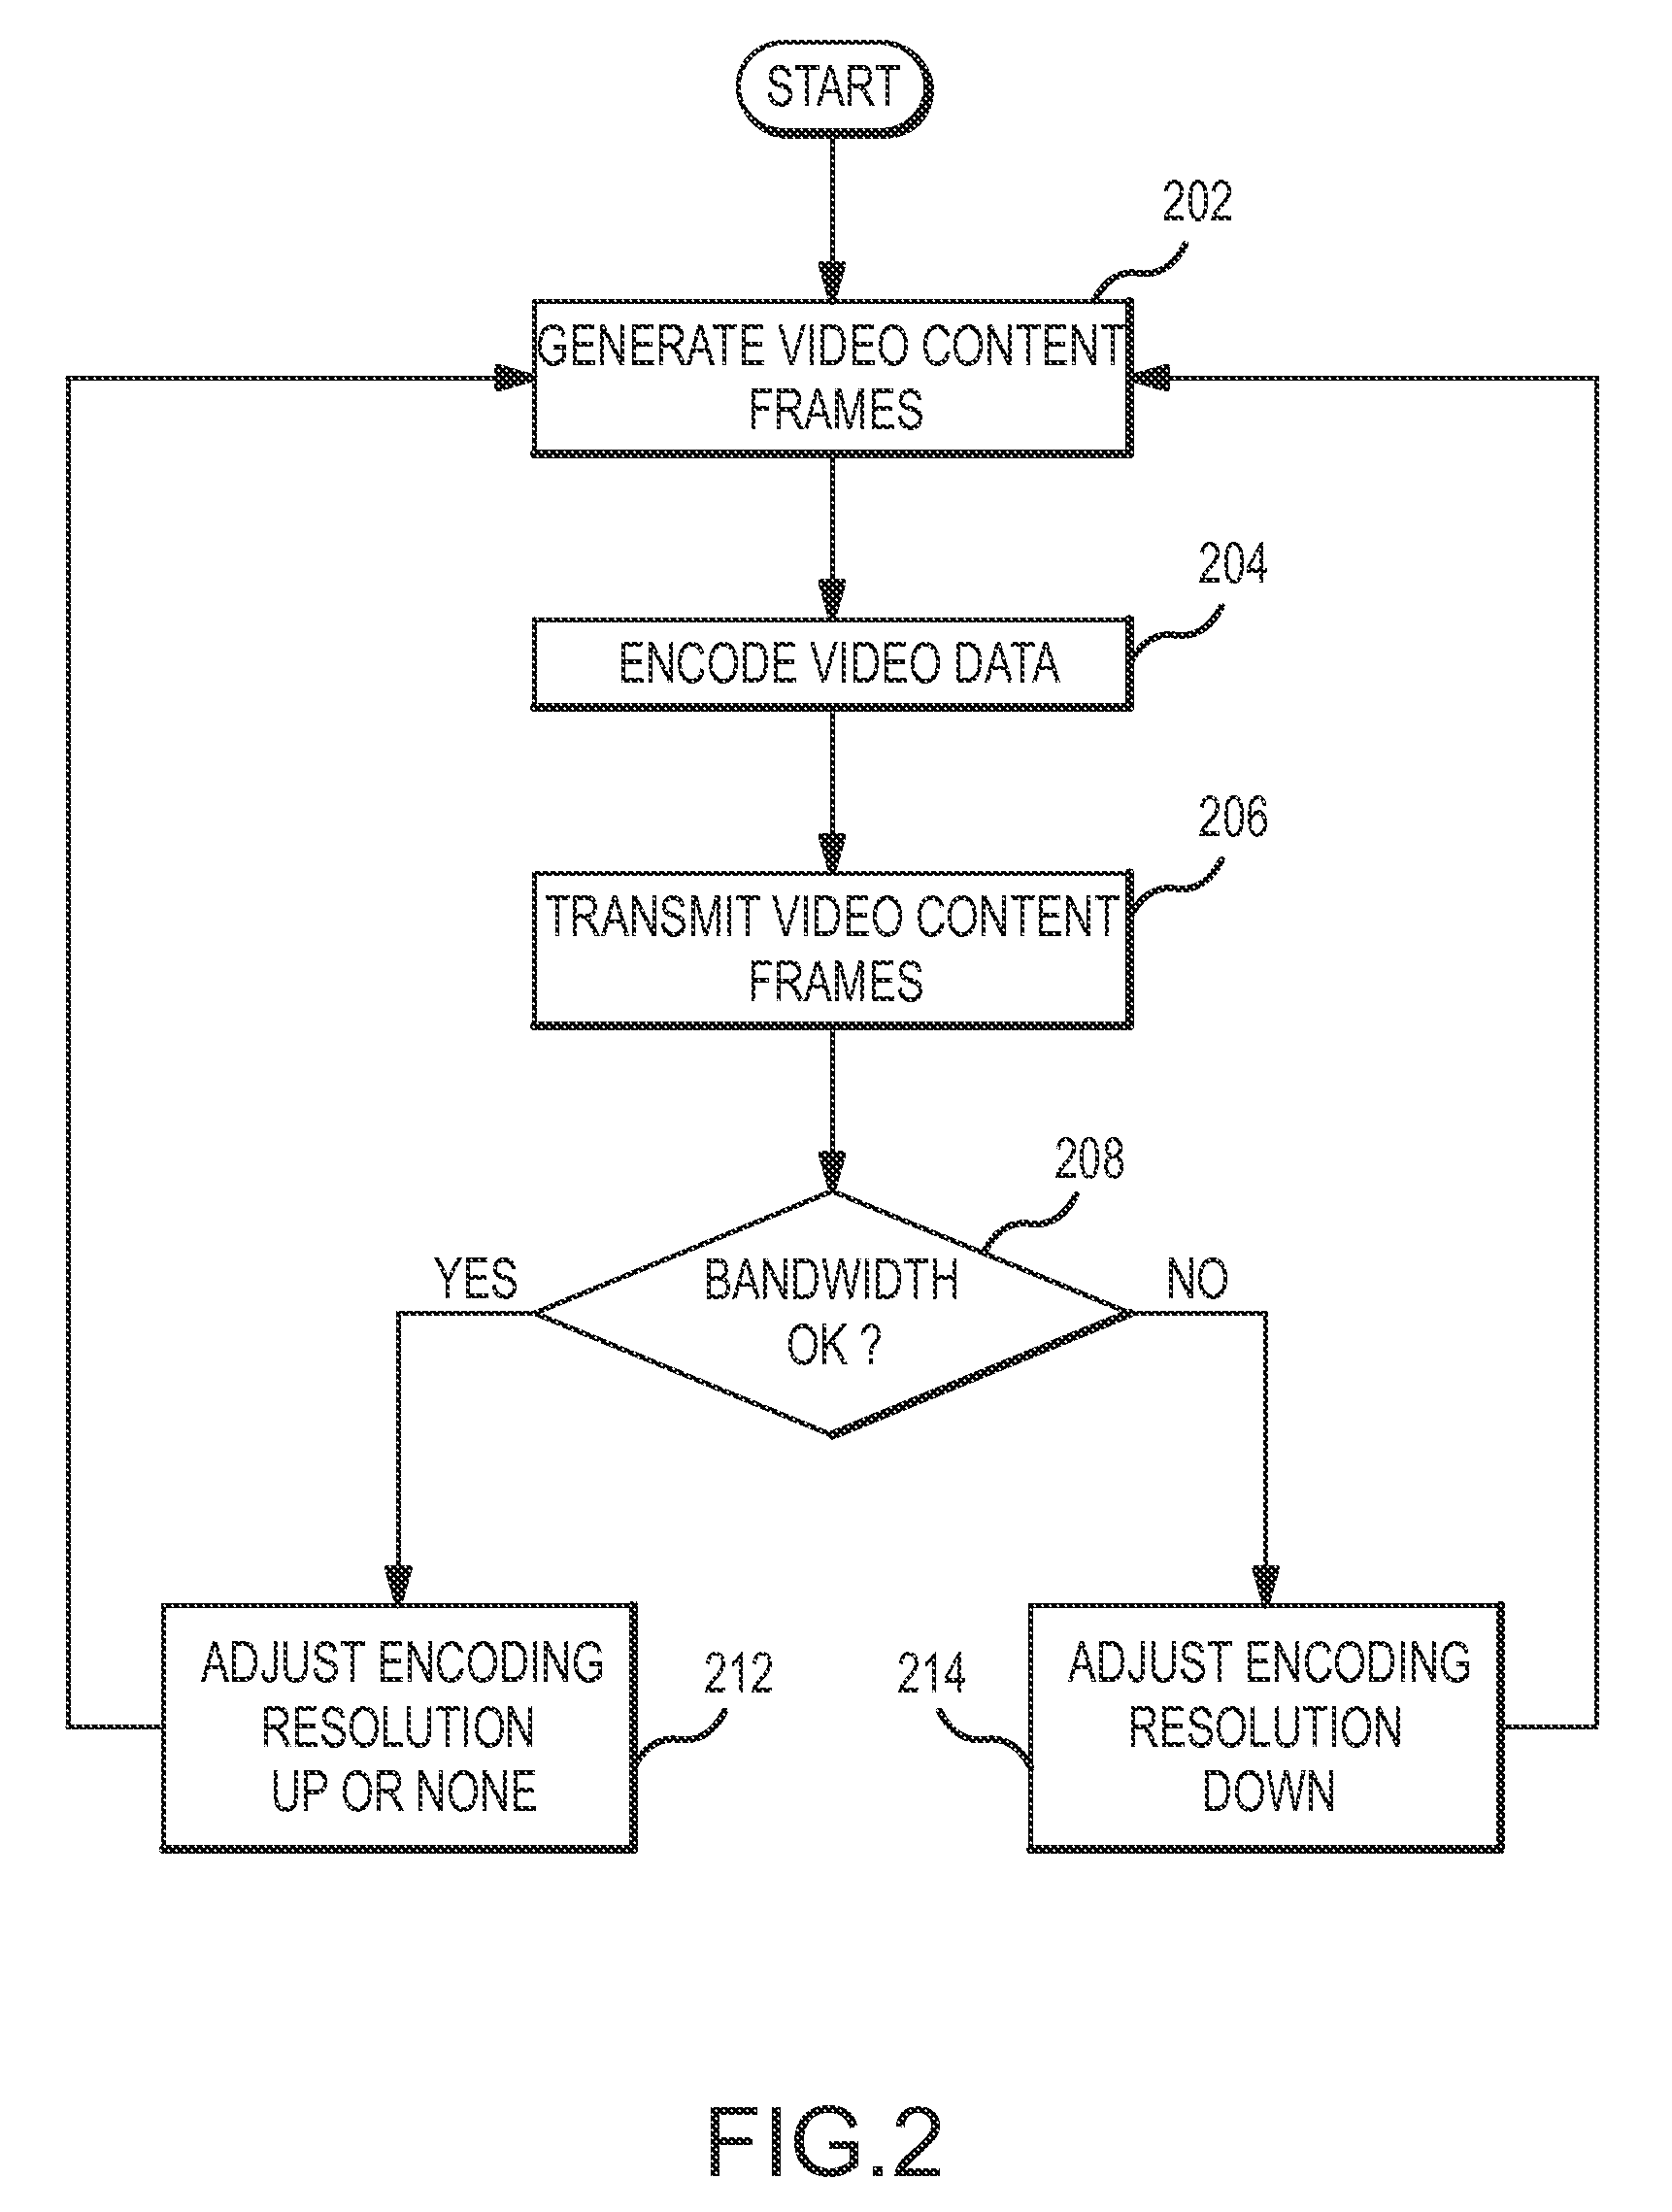 Systems and methods for automatically controlling the resolution of streaming video content